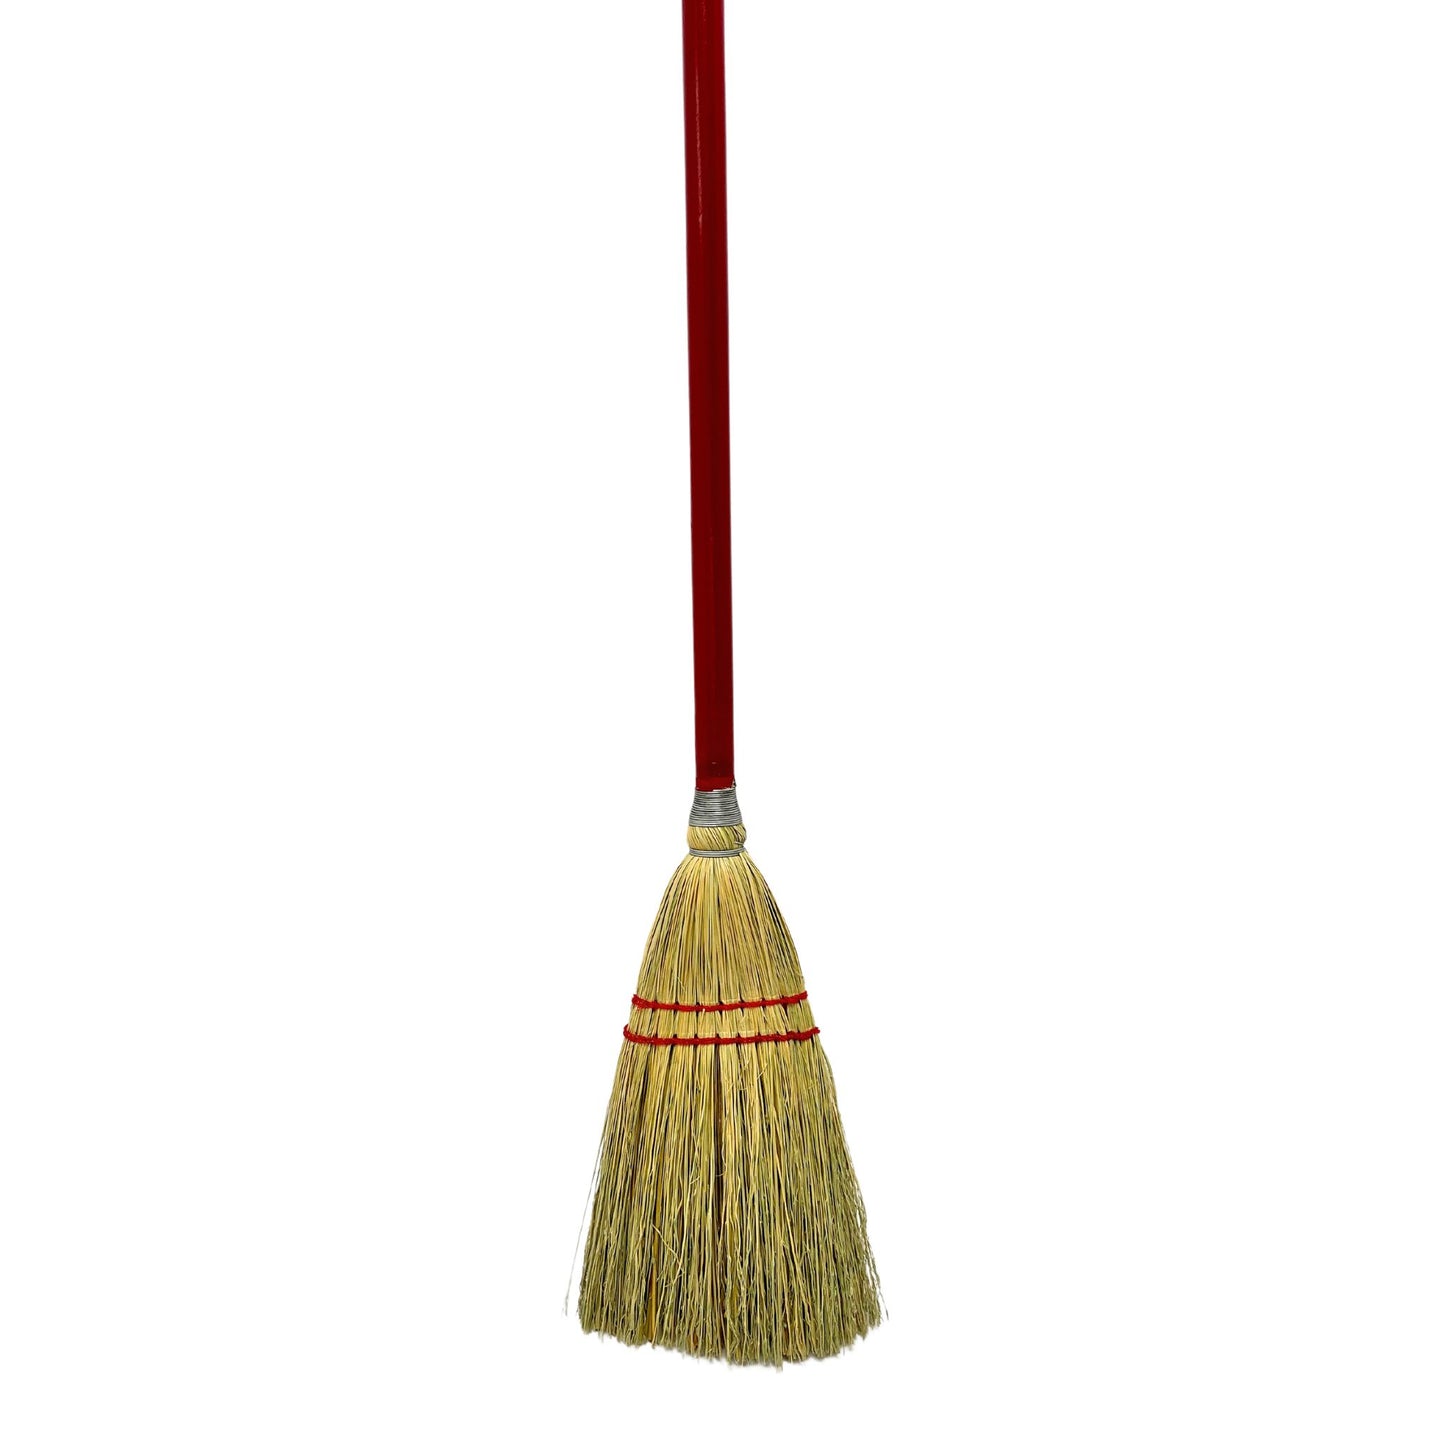 Toy Broom 24 Red Handle